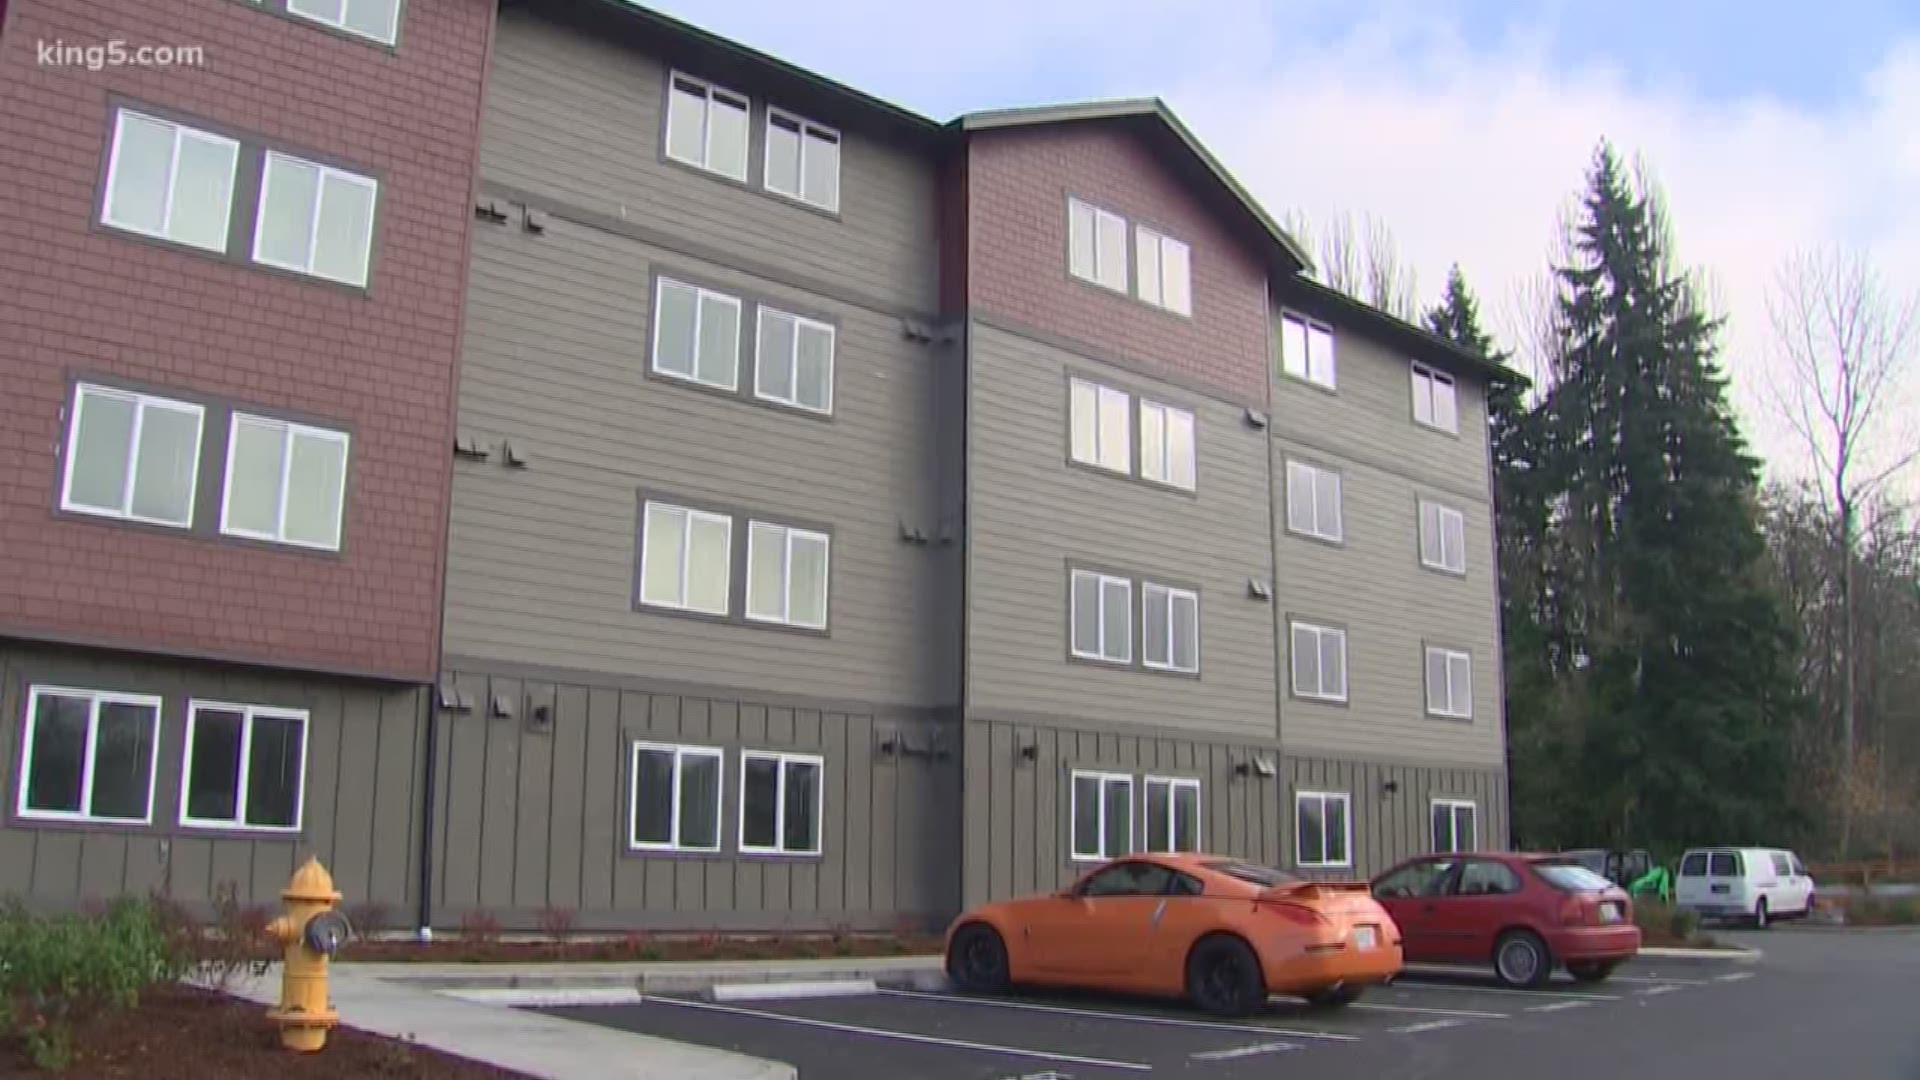 Big cities along the I-5 corridor are seeing a rise in rents.